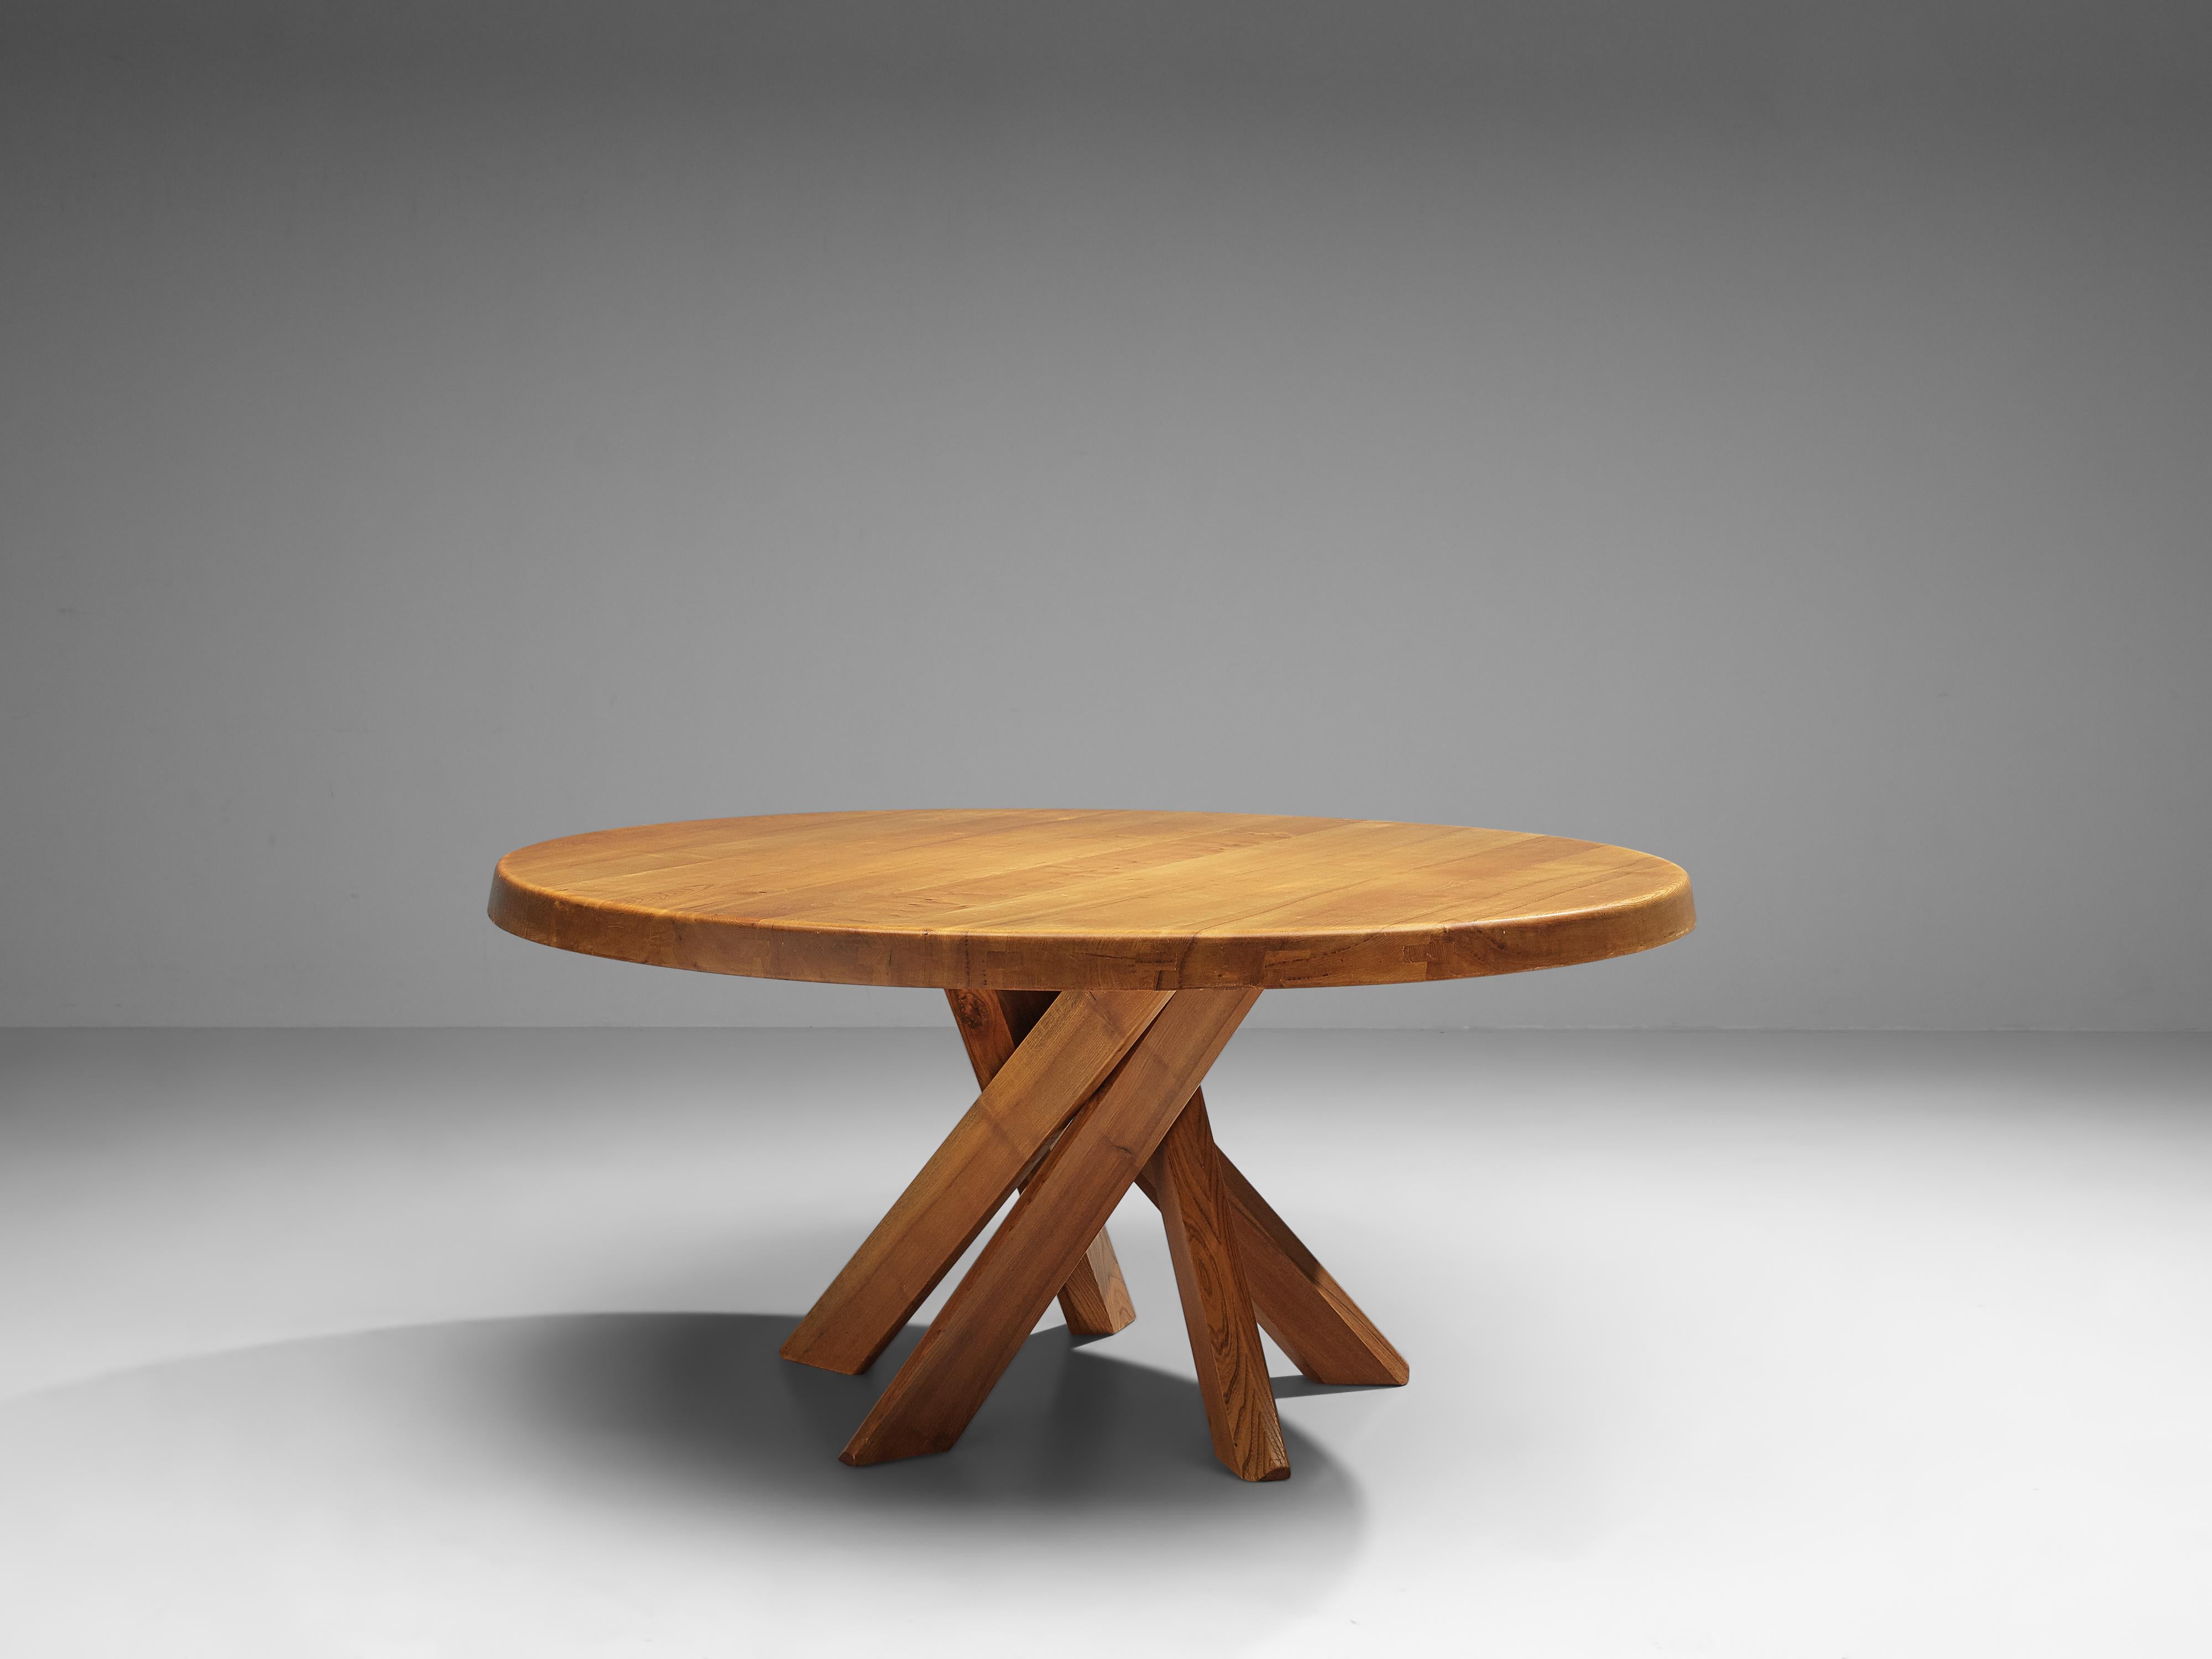 Pierre Chapo, dining table model T21 'Sfax', elm, France, 1960s

This round dining table is designed by Pierre Chapo. The shape of the base creates a very dynamic look. The perfectly made solid wood joints, also shown on the side of the top with